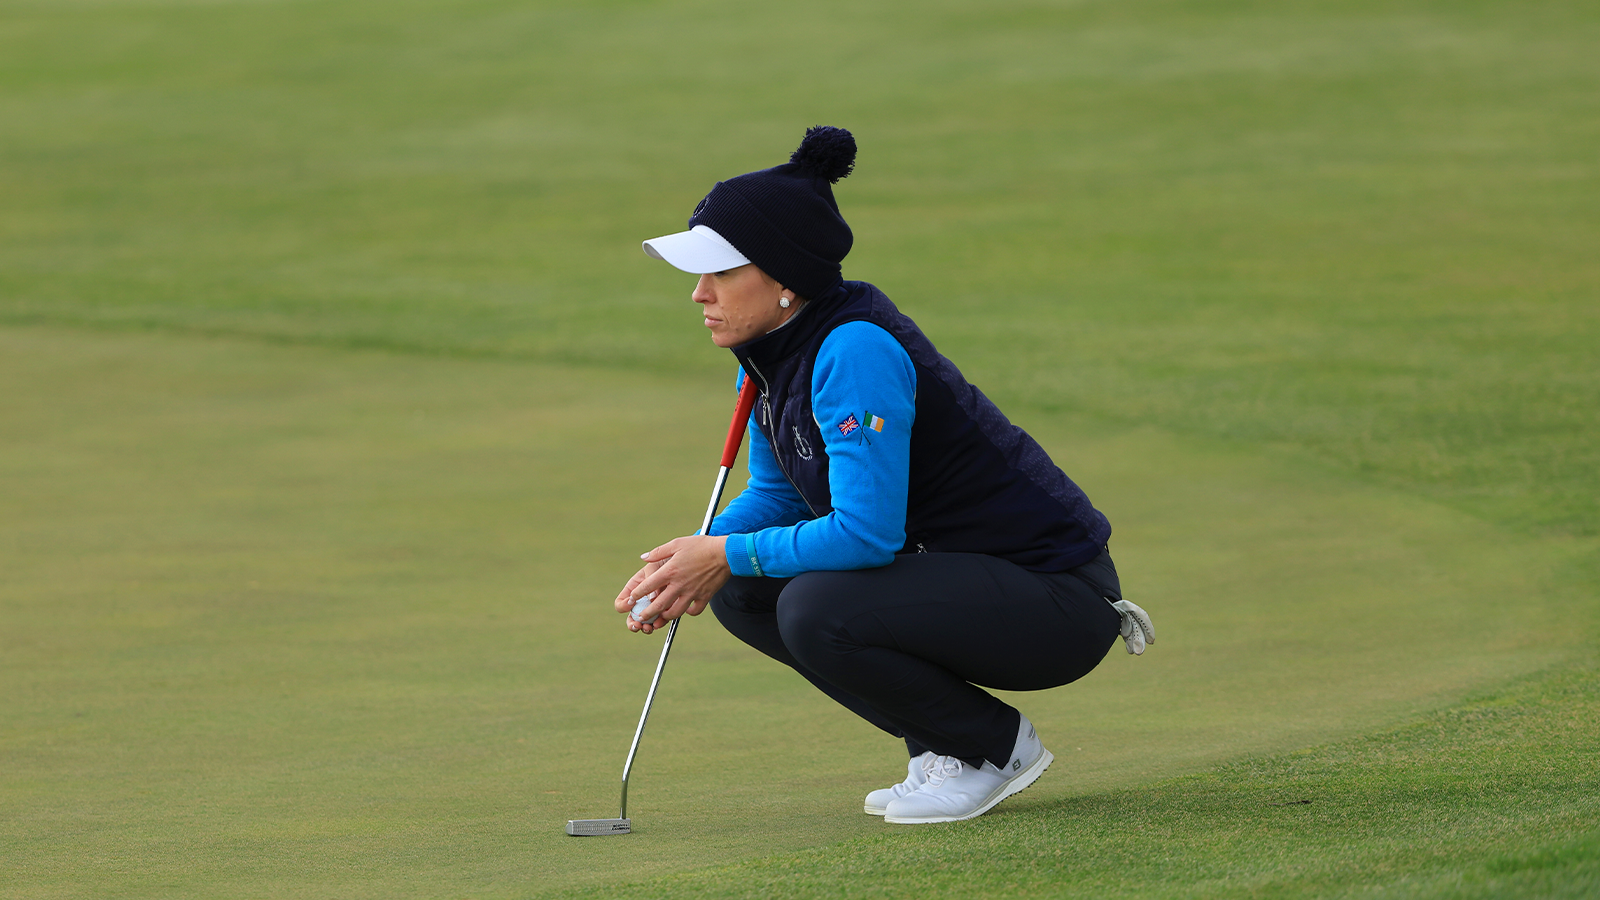 Heather MacRae of Team Great Britain and Ireland reads her putt during the first round of the 2nd Women’s PGA Cup at Twin Warriors Golf Club on Thursday, October 27, 2022 in Santa Ana Pueblo, New Mexico. (Photo by Sam Greenwood/PGA of America)